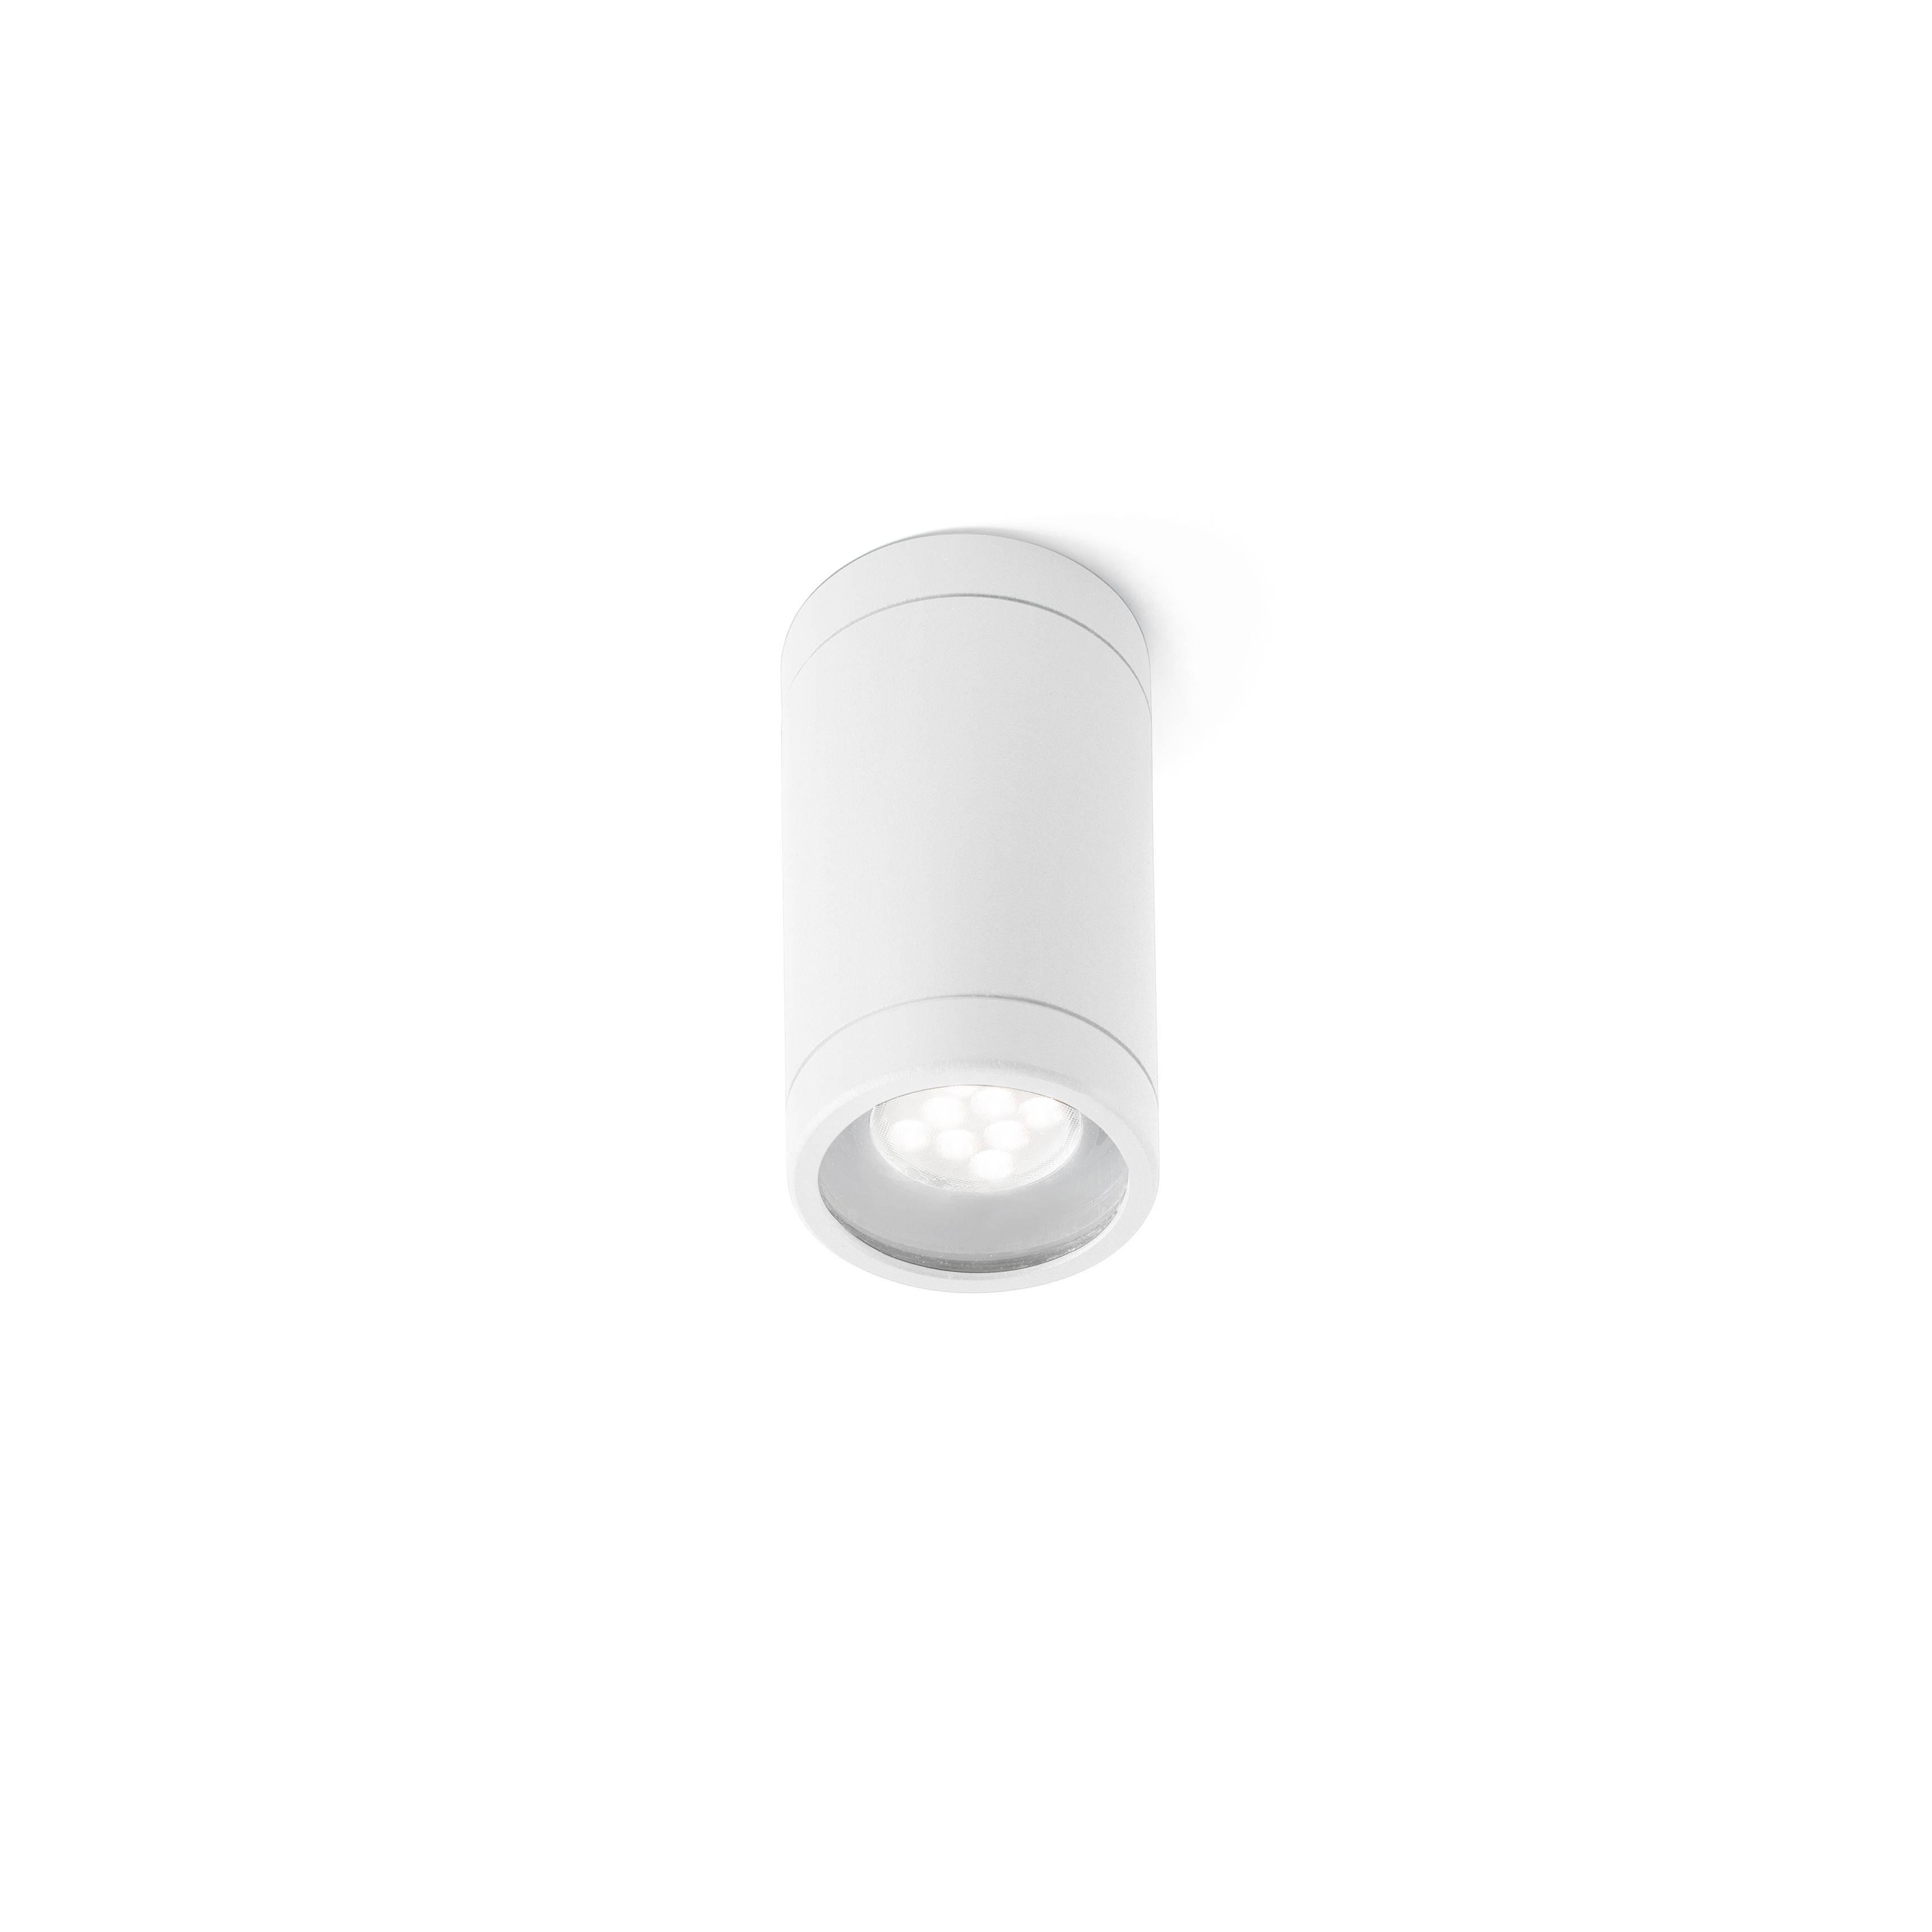 Olot 1 Light Outdoor Surface Mounted Ceiling Light White IP44 GU10